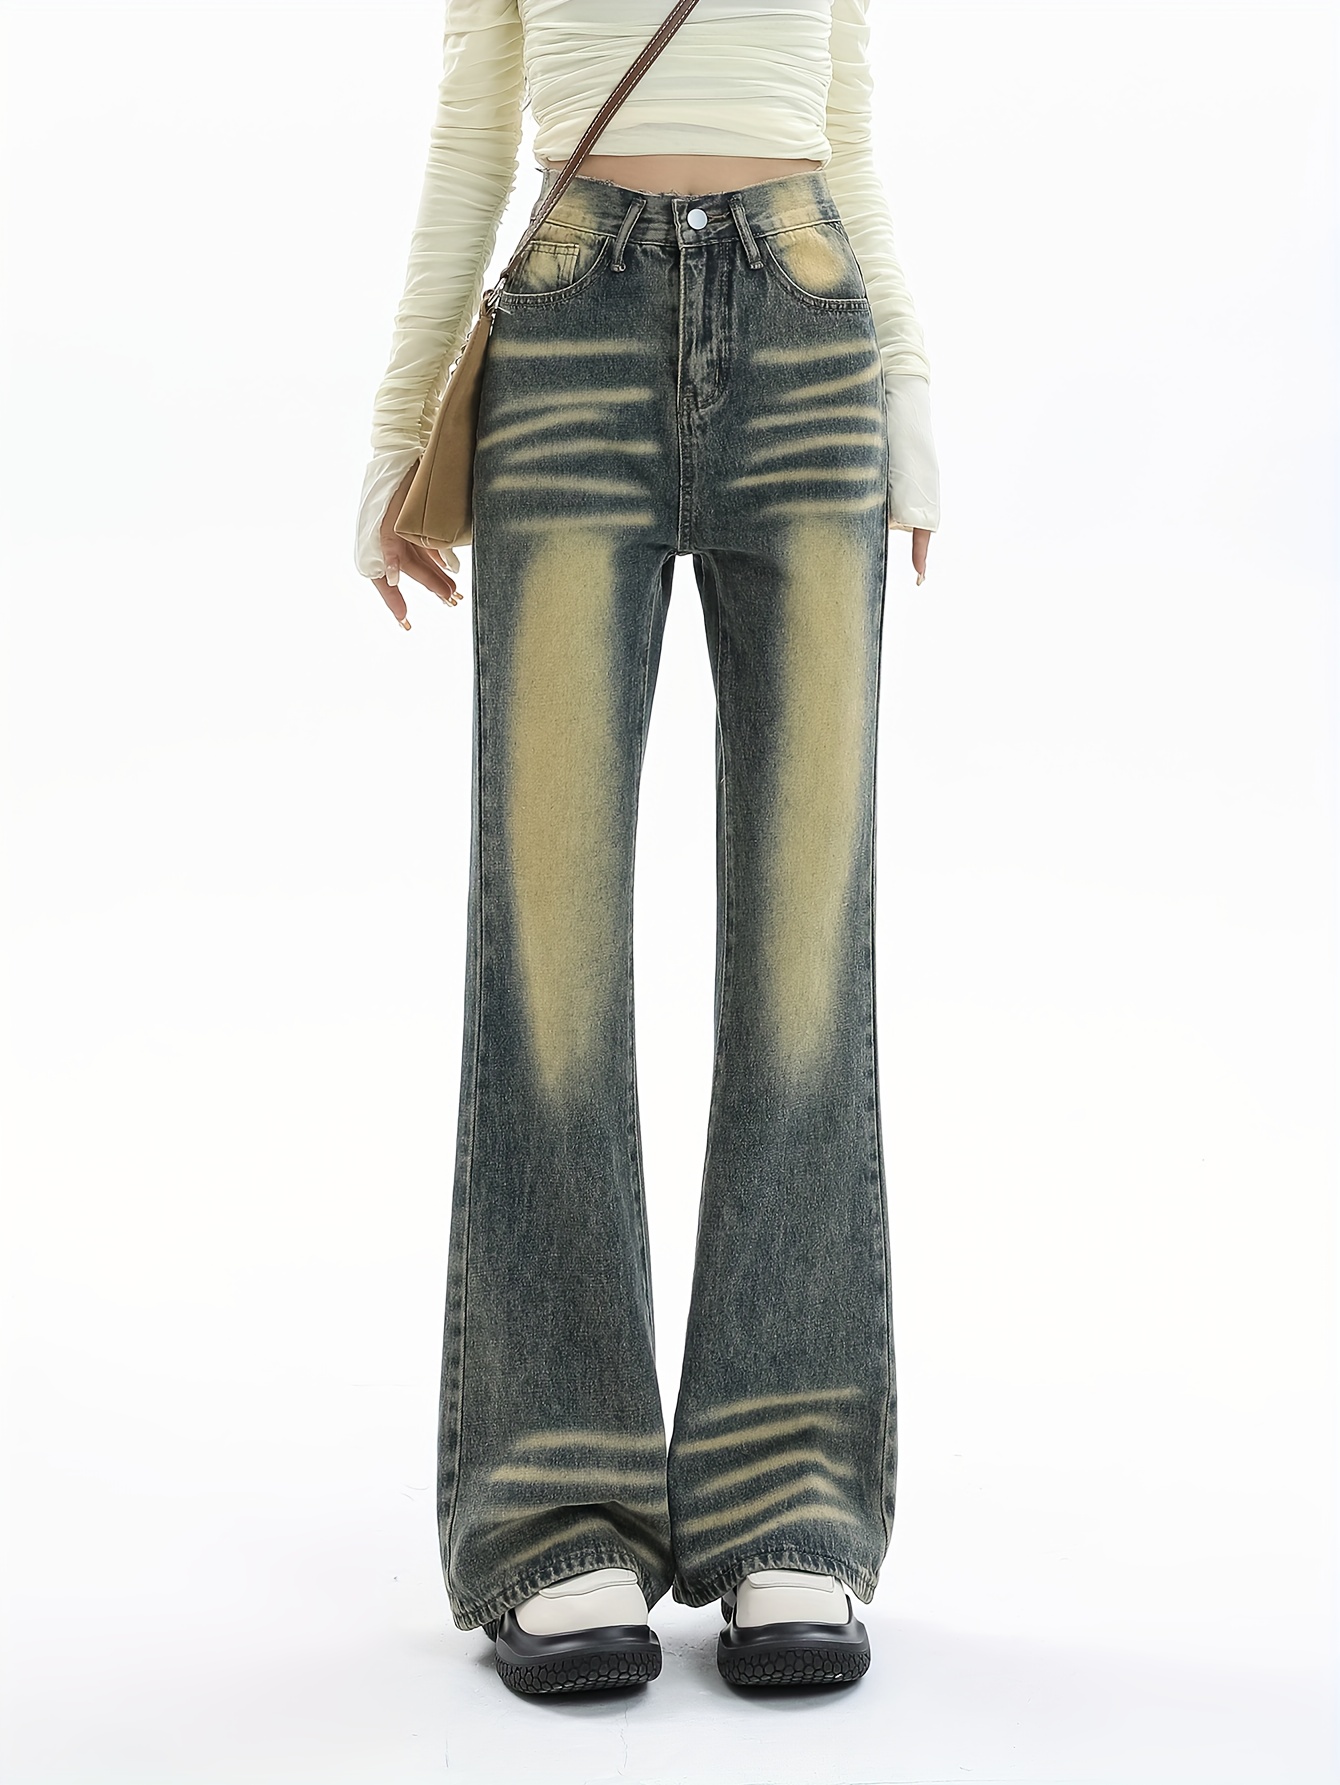 Vintage Wash Y2K Flare Jeans  Clothes, Fashion outfits, Jeans